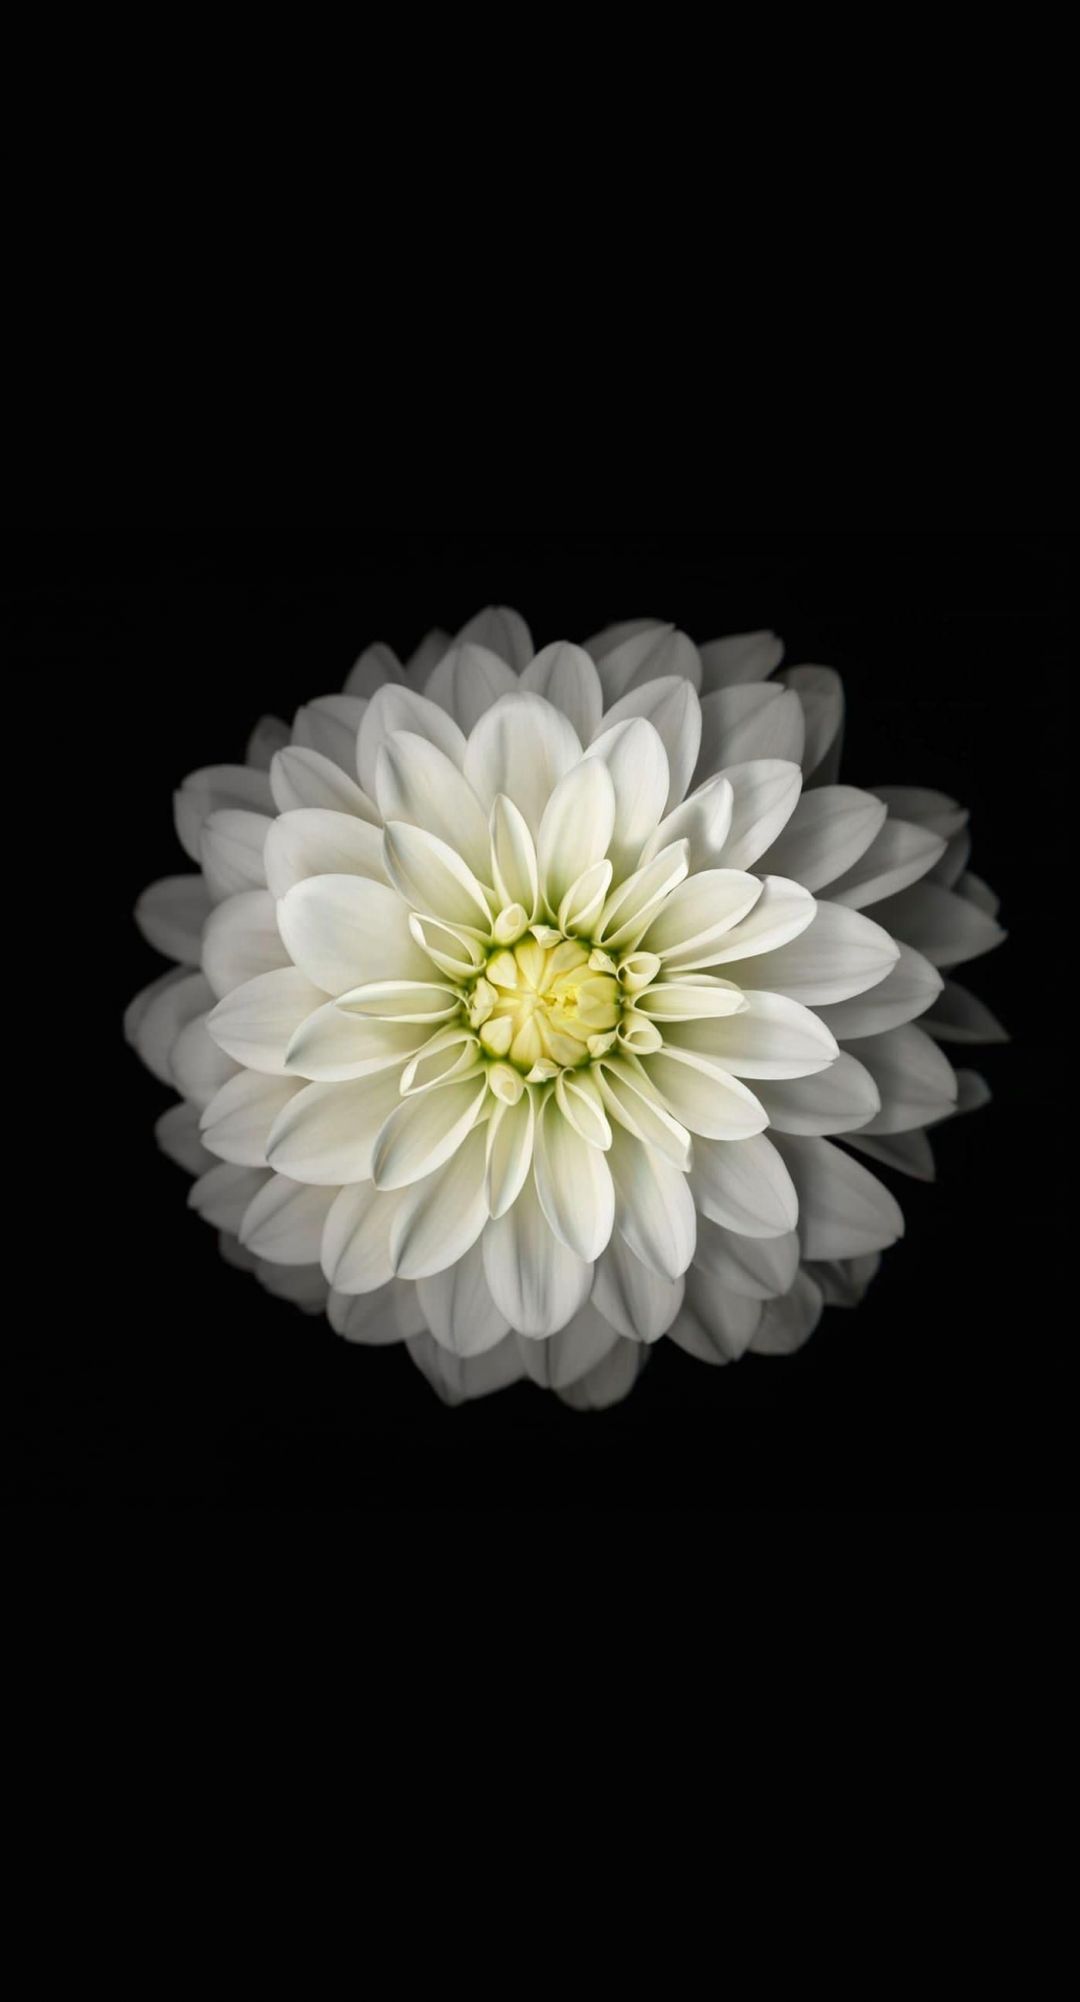 ✓[90+] Best White Flower iPhone Wallpaper Ideas - iPhone 7 - Android /  iPhone HD Wallpaper Background Download (png / jpg) (2023)